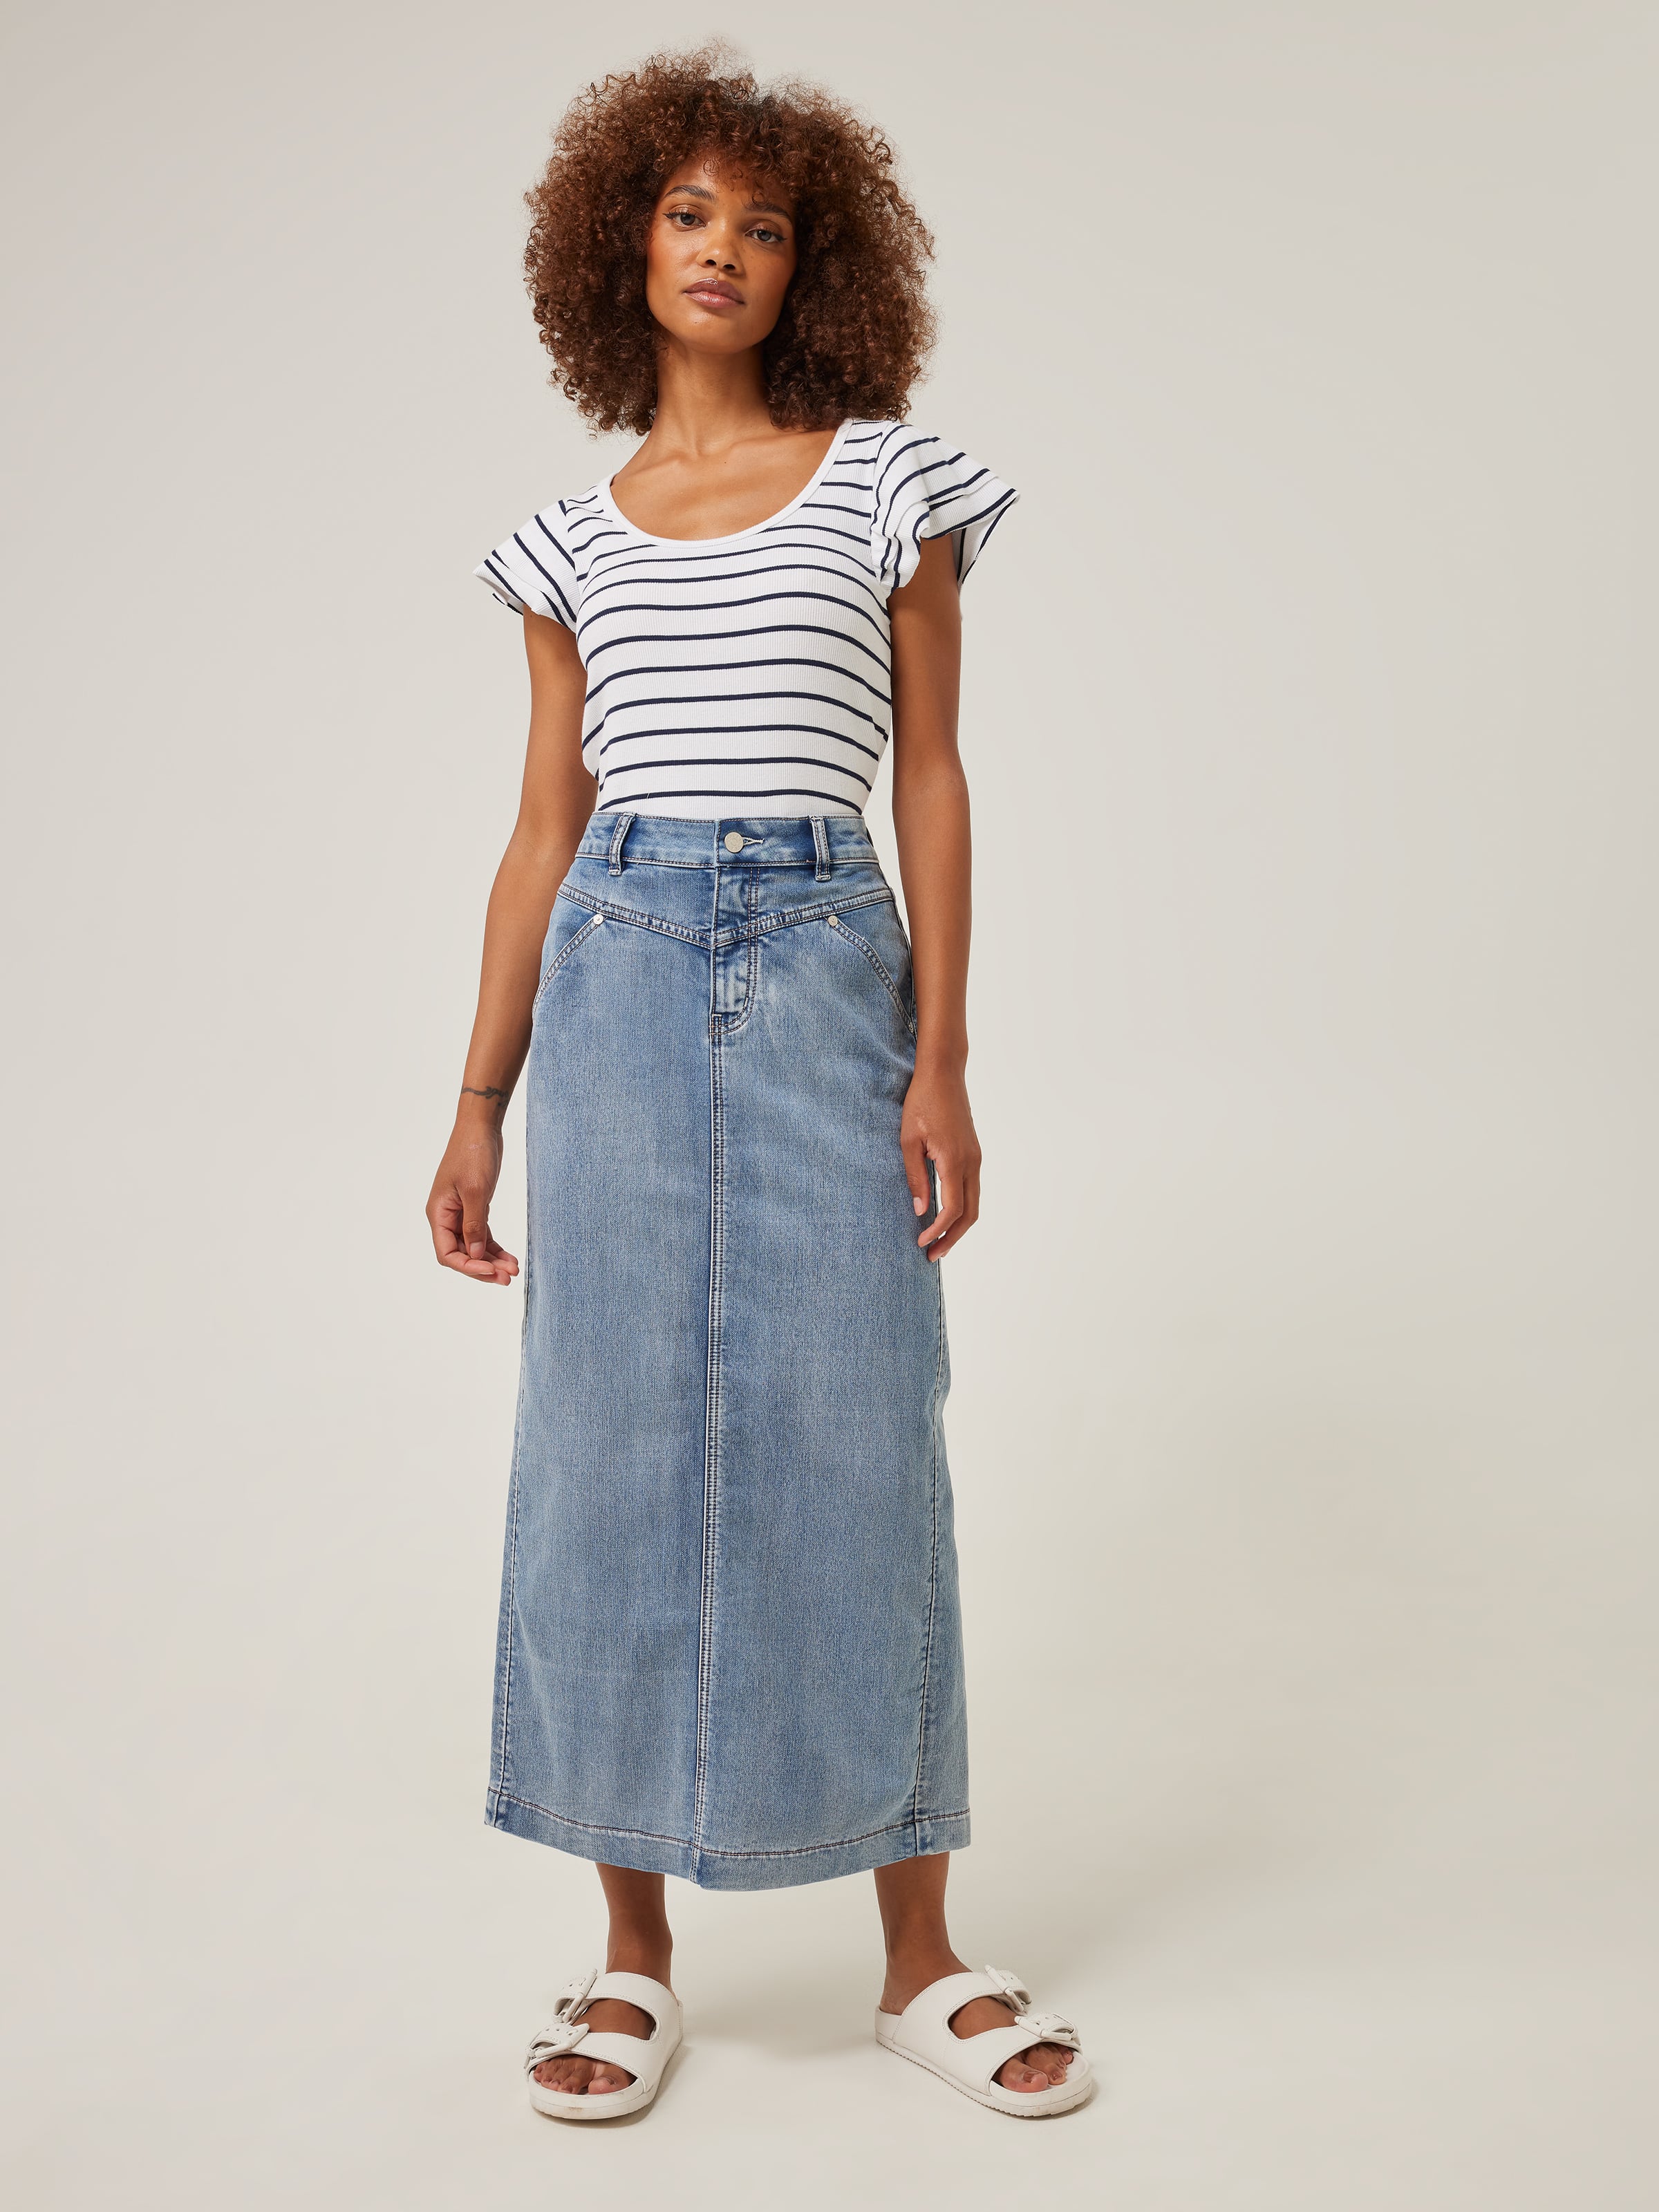 Switch Up the French Girl Look With a Denim Skirt | Vogue